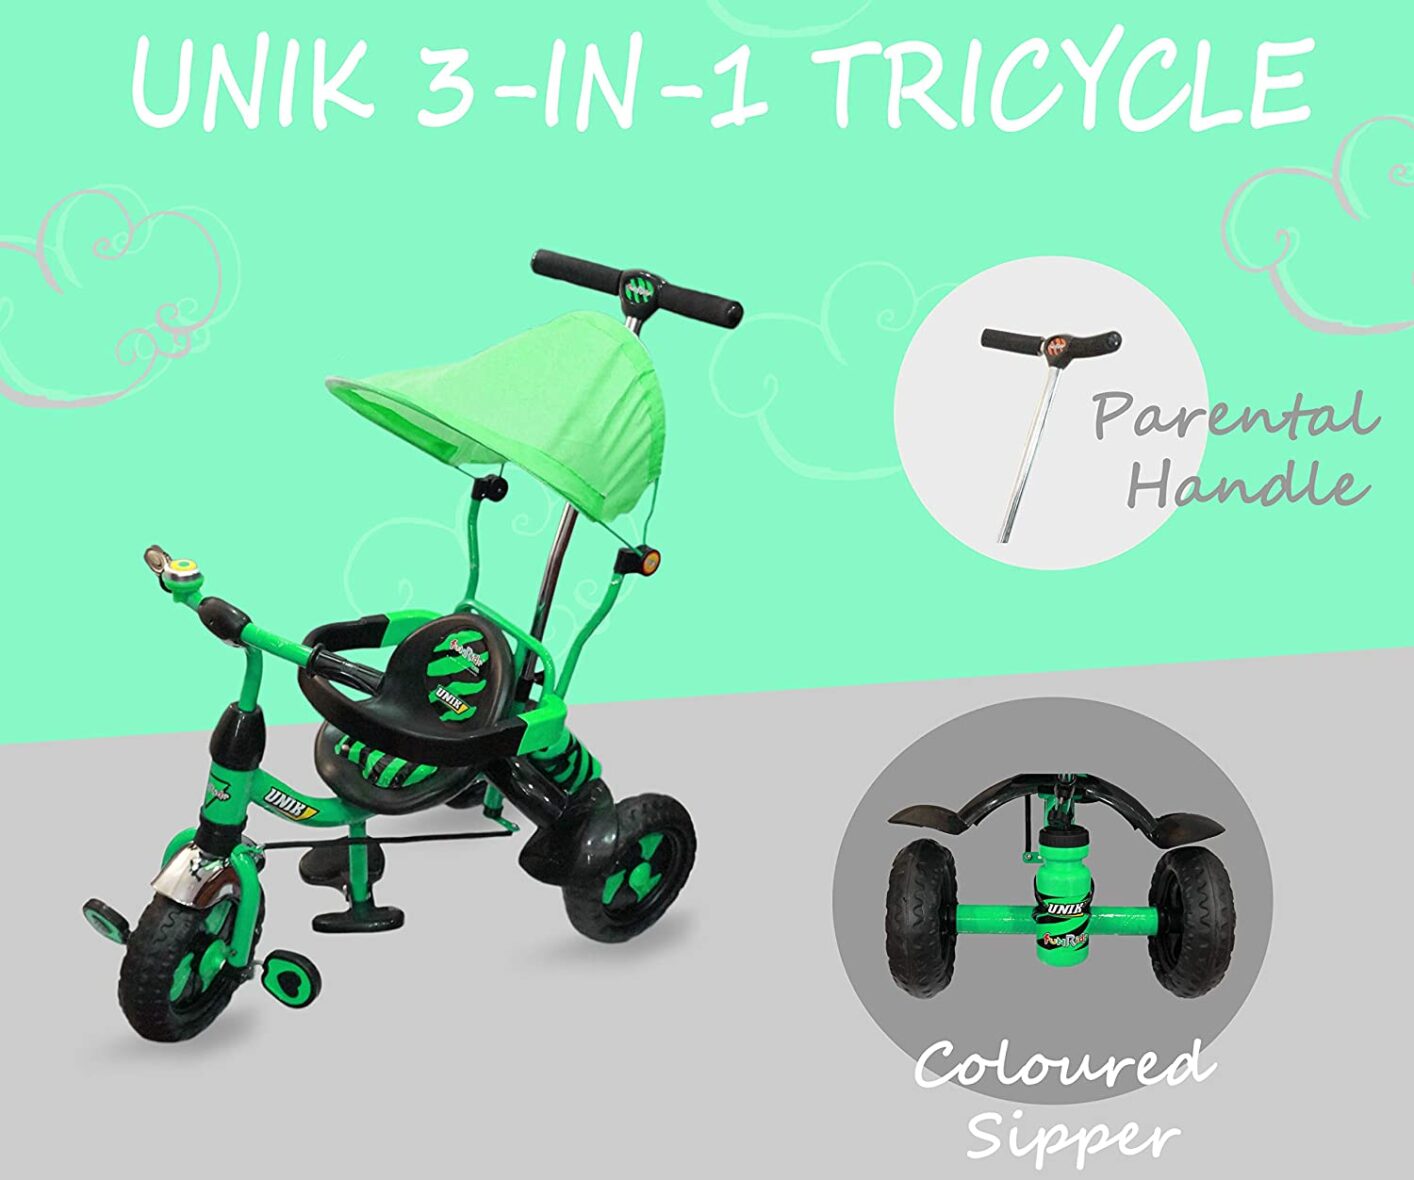 Fun Ride Baby Tricycle Unik Deluxe Rider 1 to 4 Years (6)